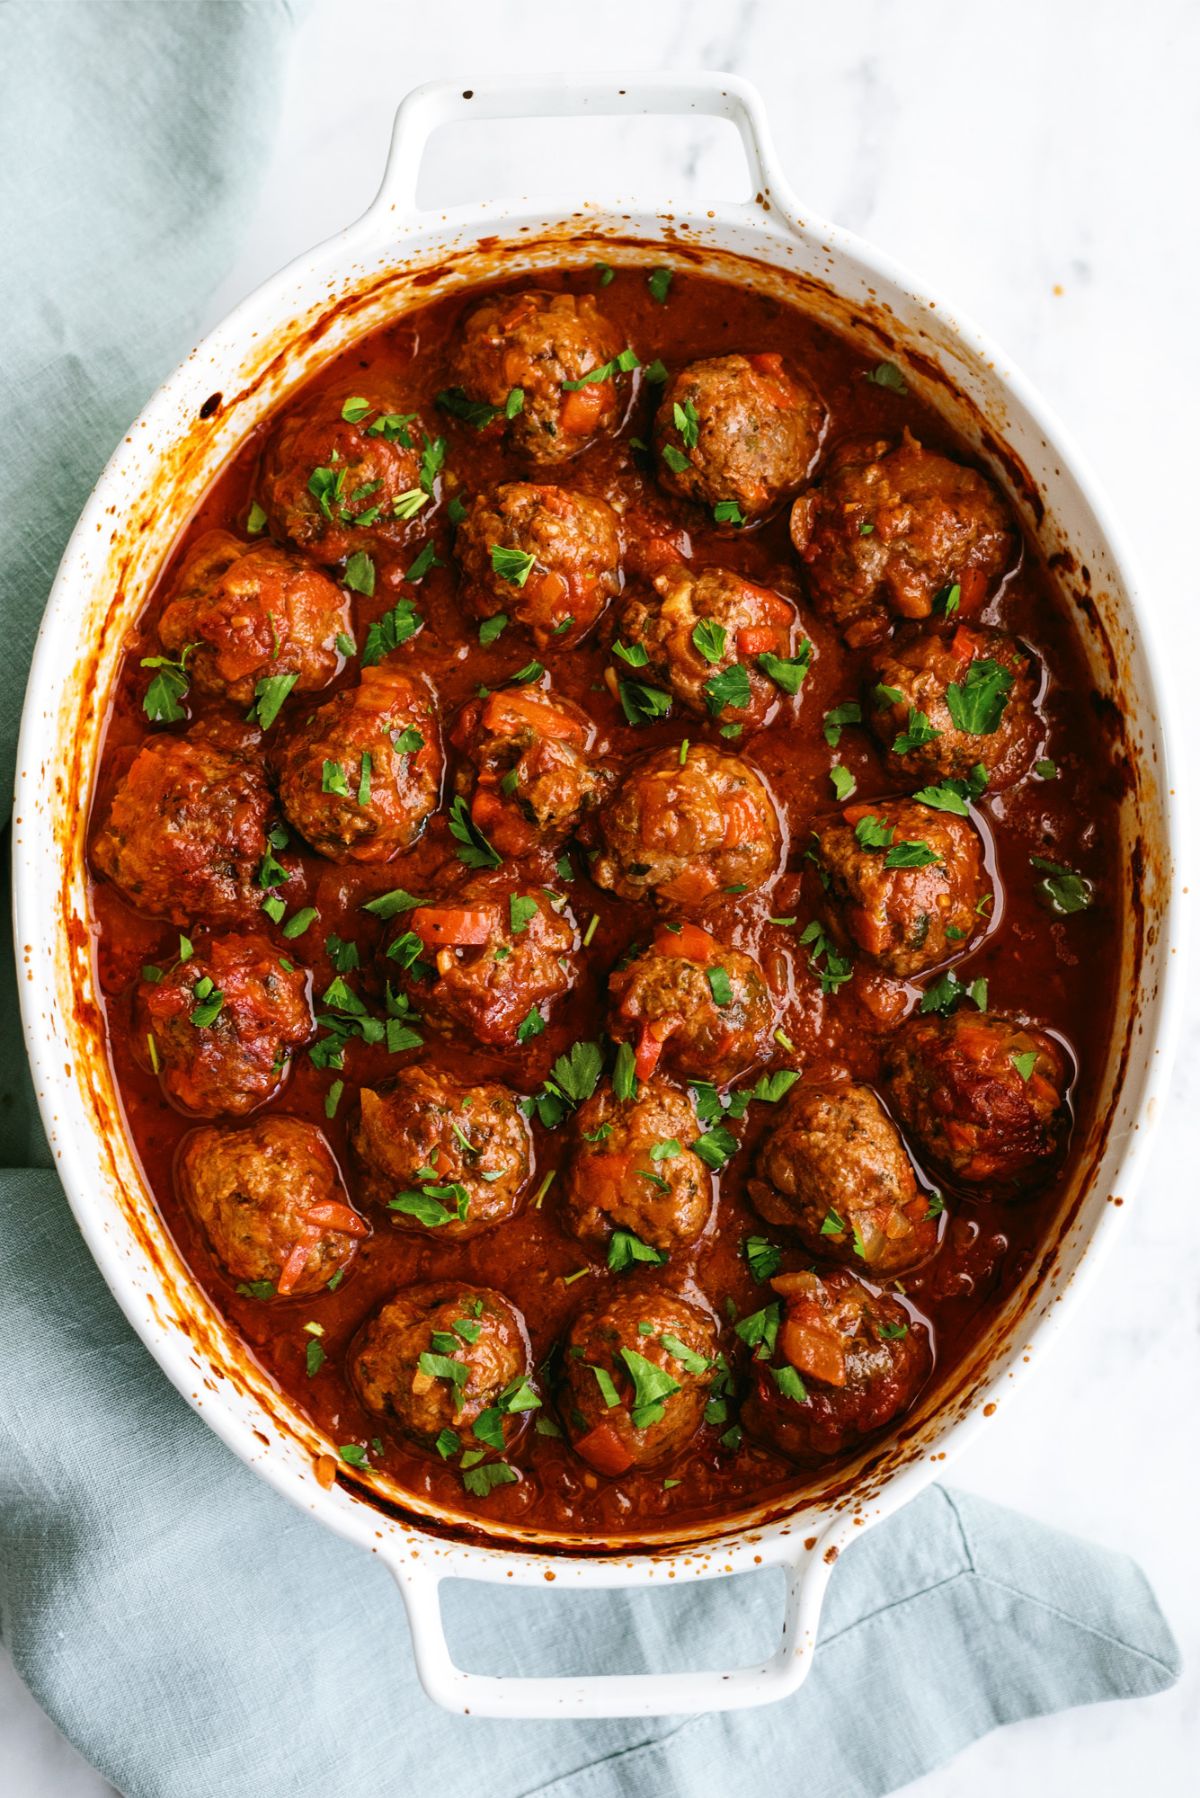 Top view of a pan of Porcupine Meatballs in sauce